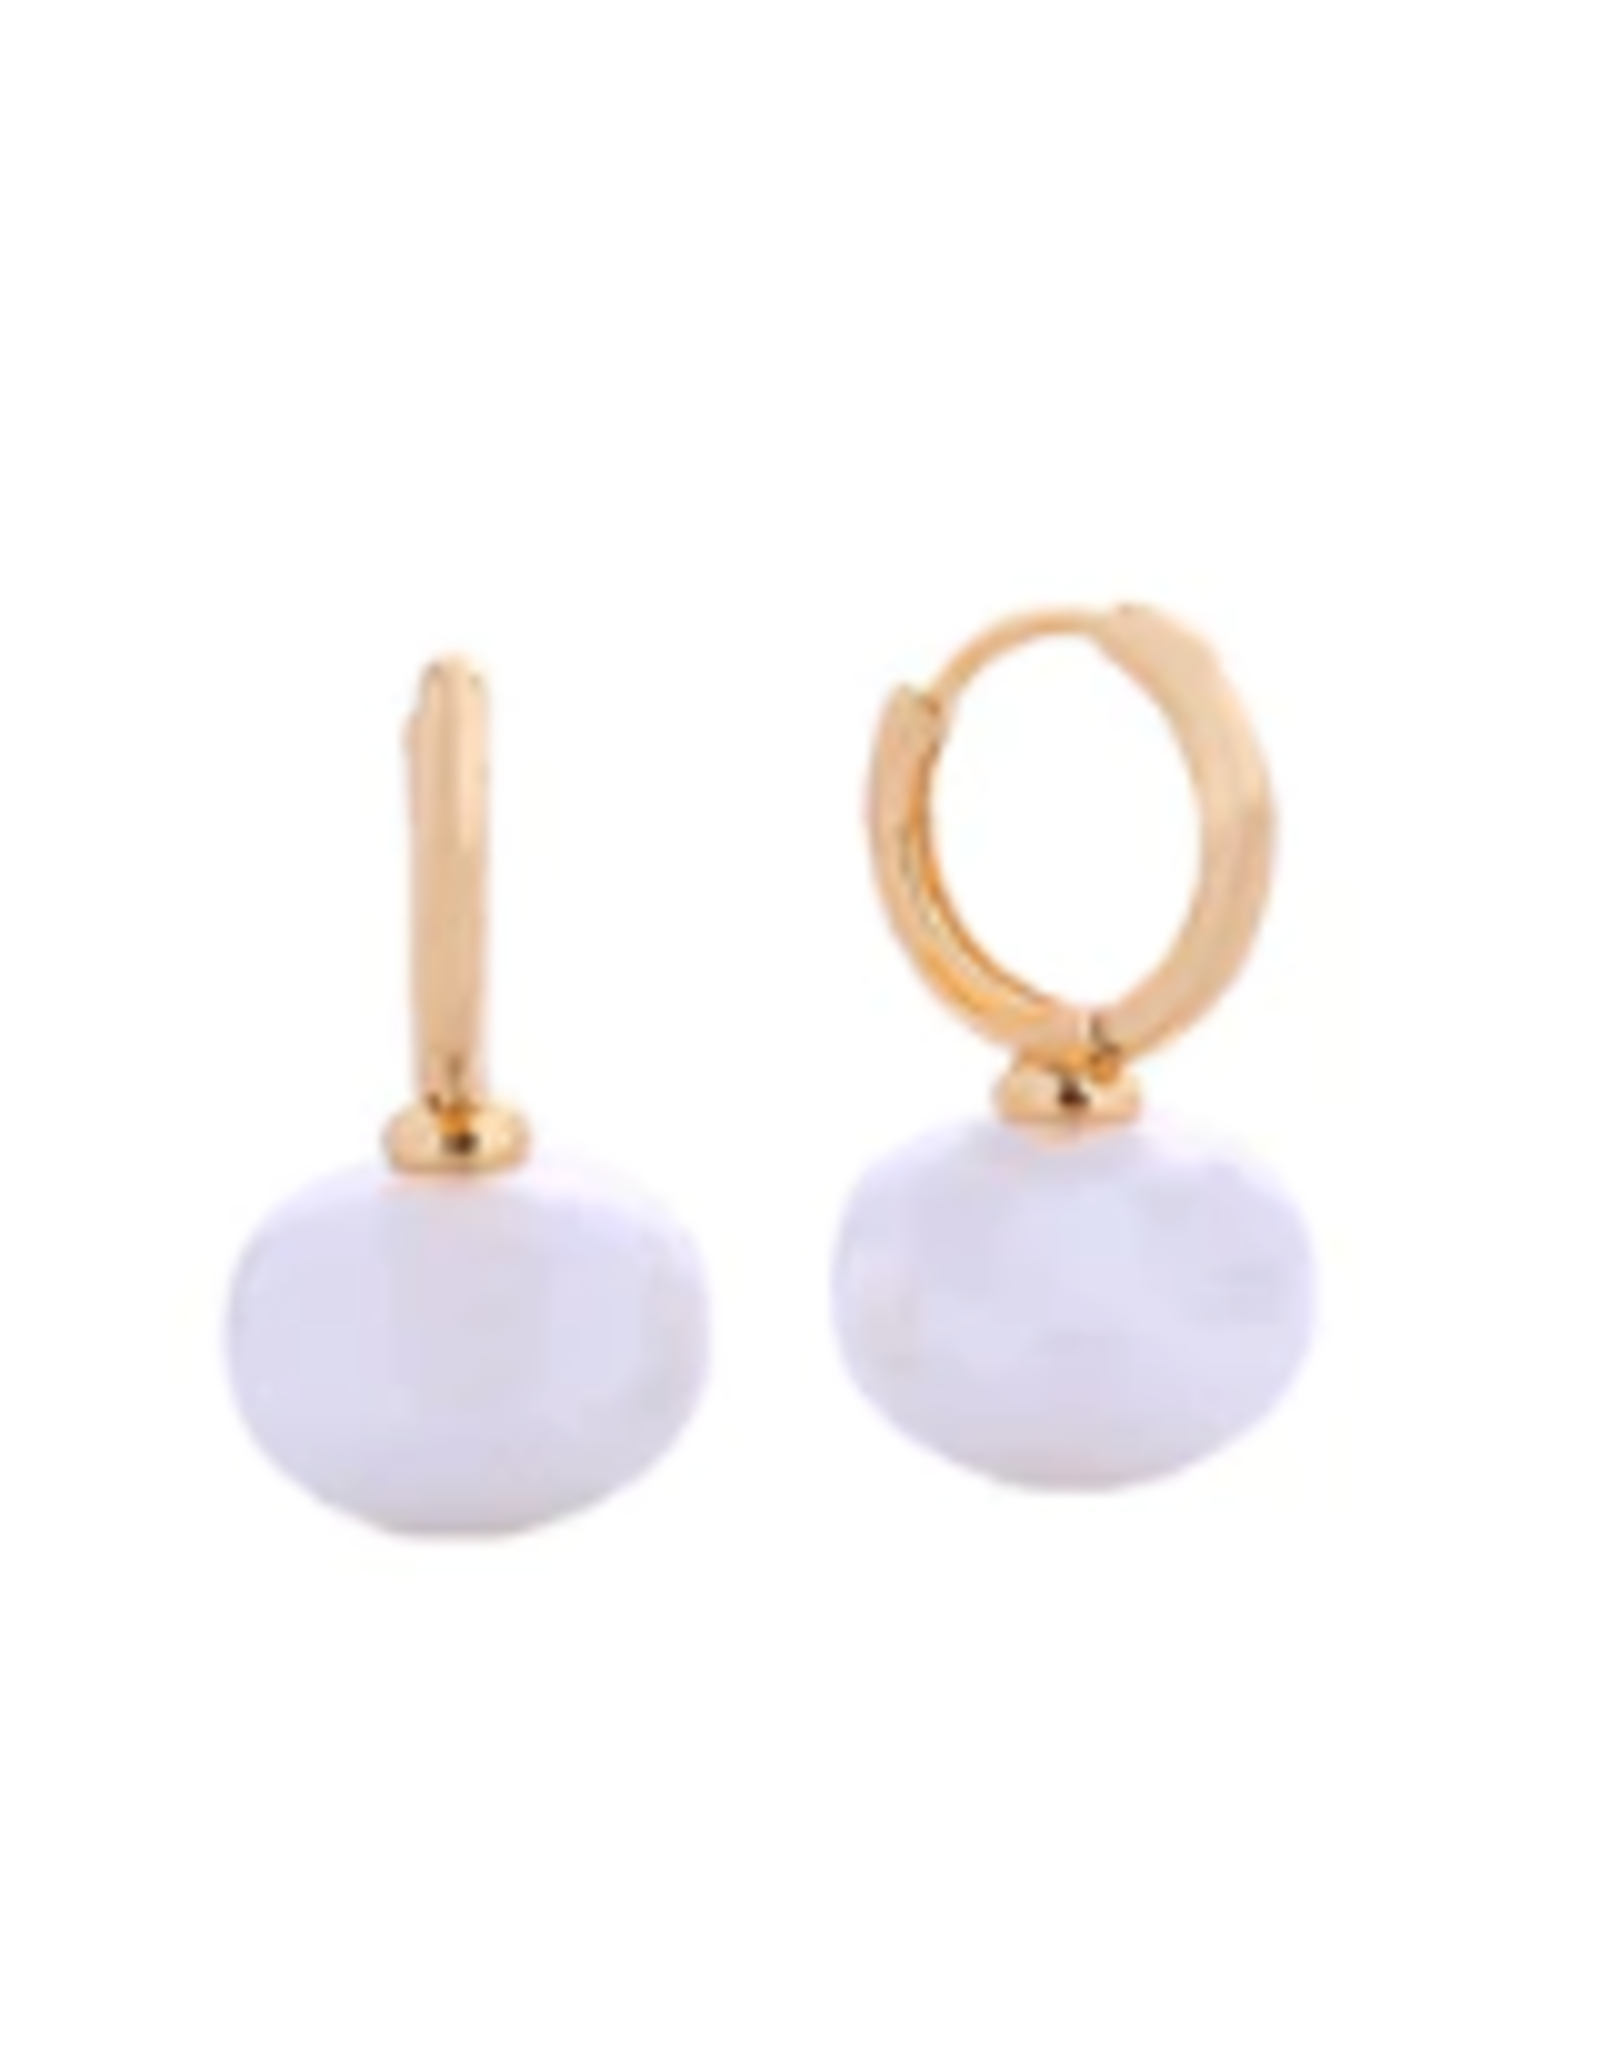 KW 14K Dipped Earring, Large Pearl with Hoop